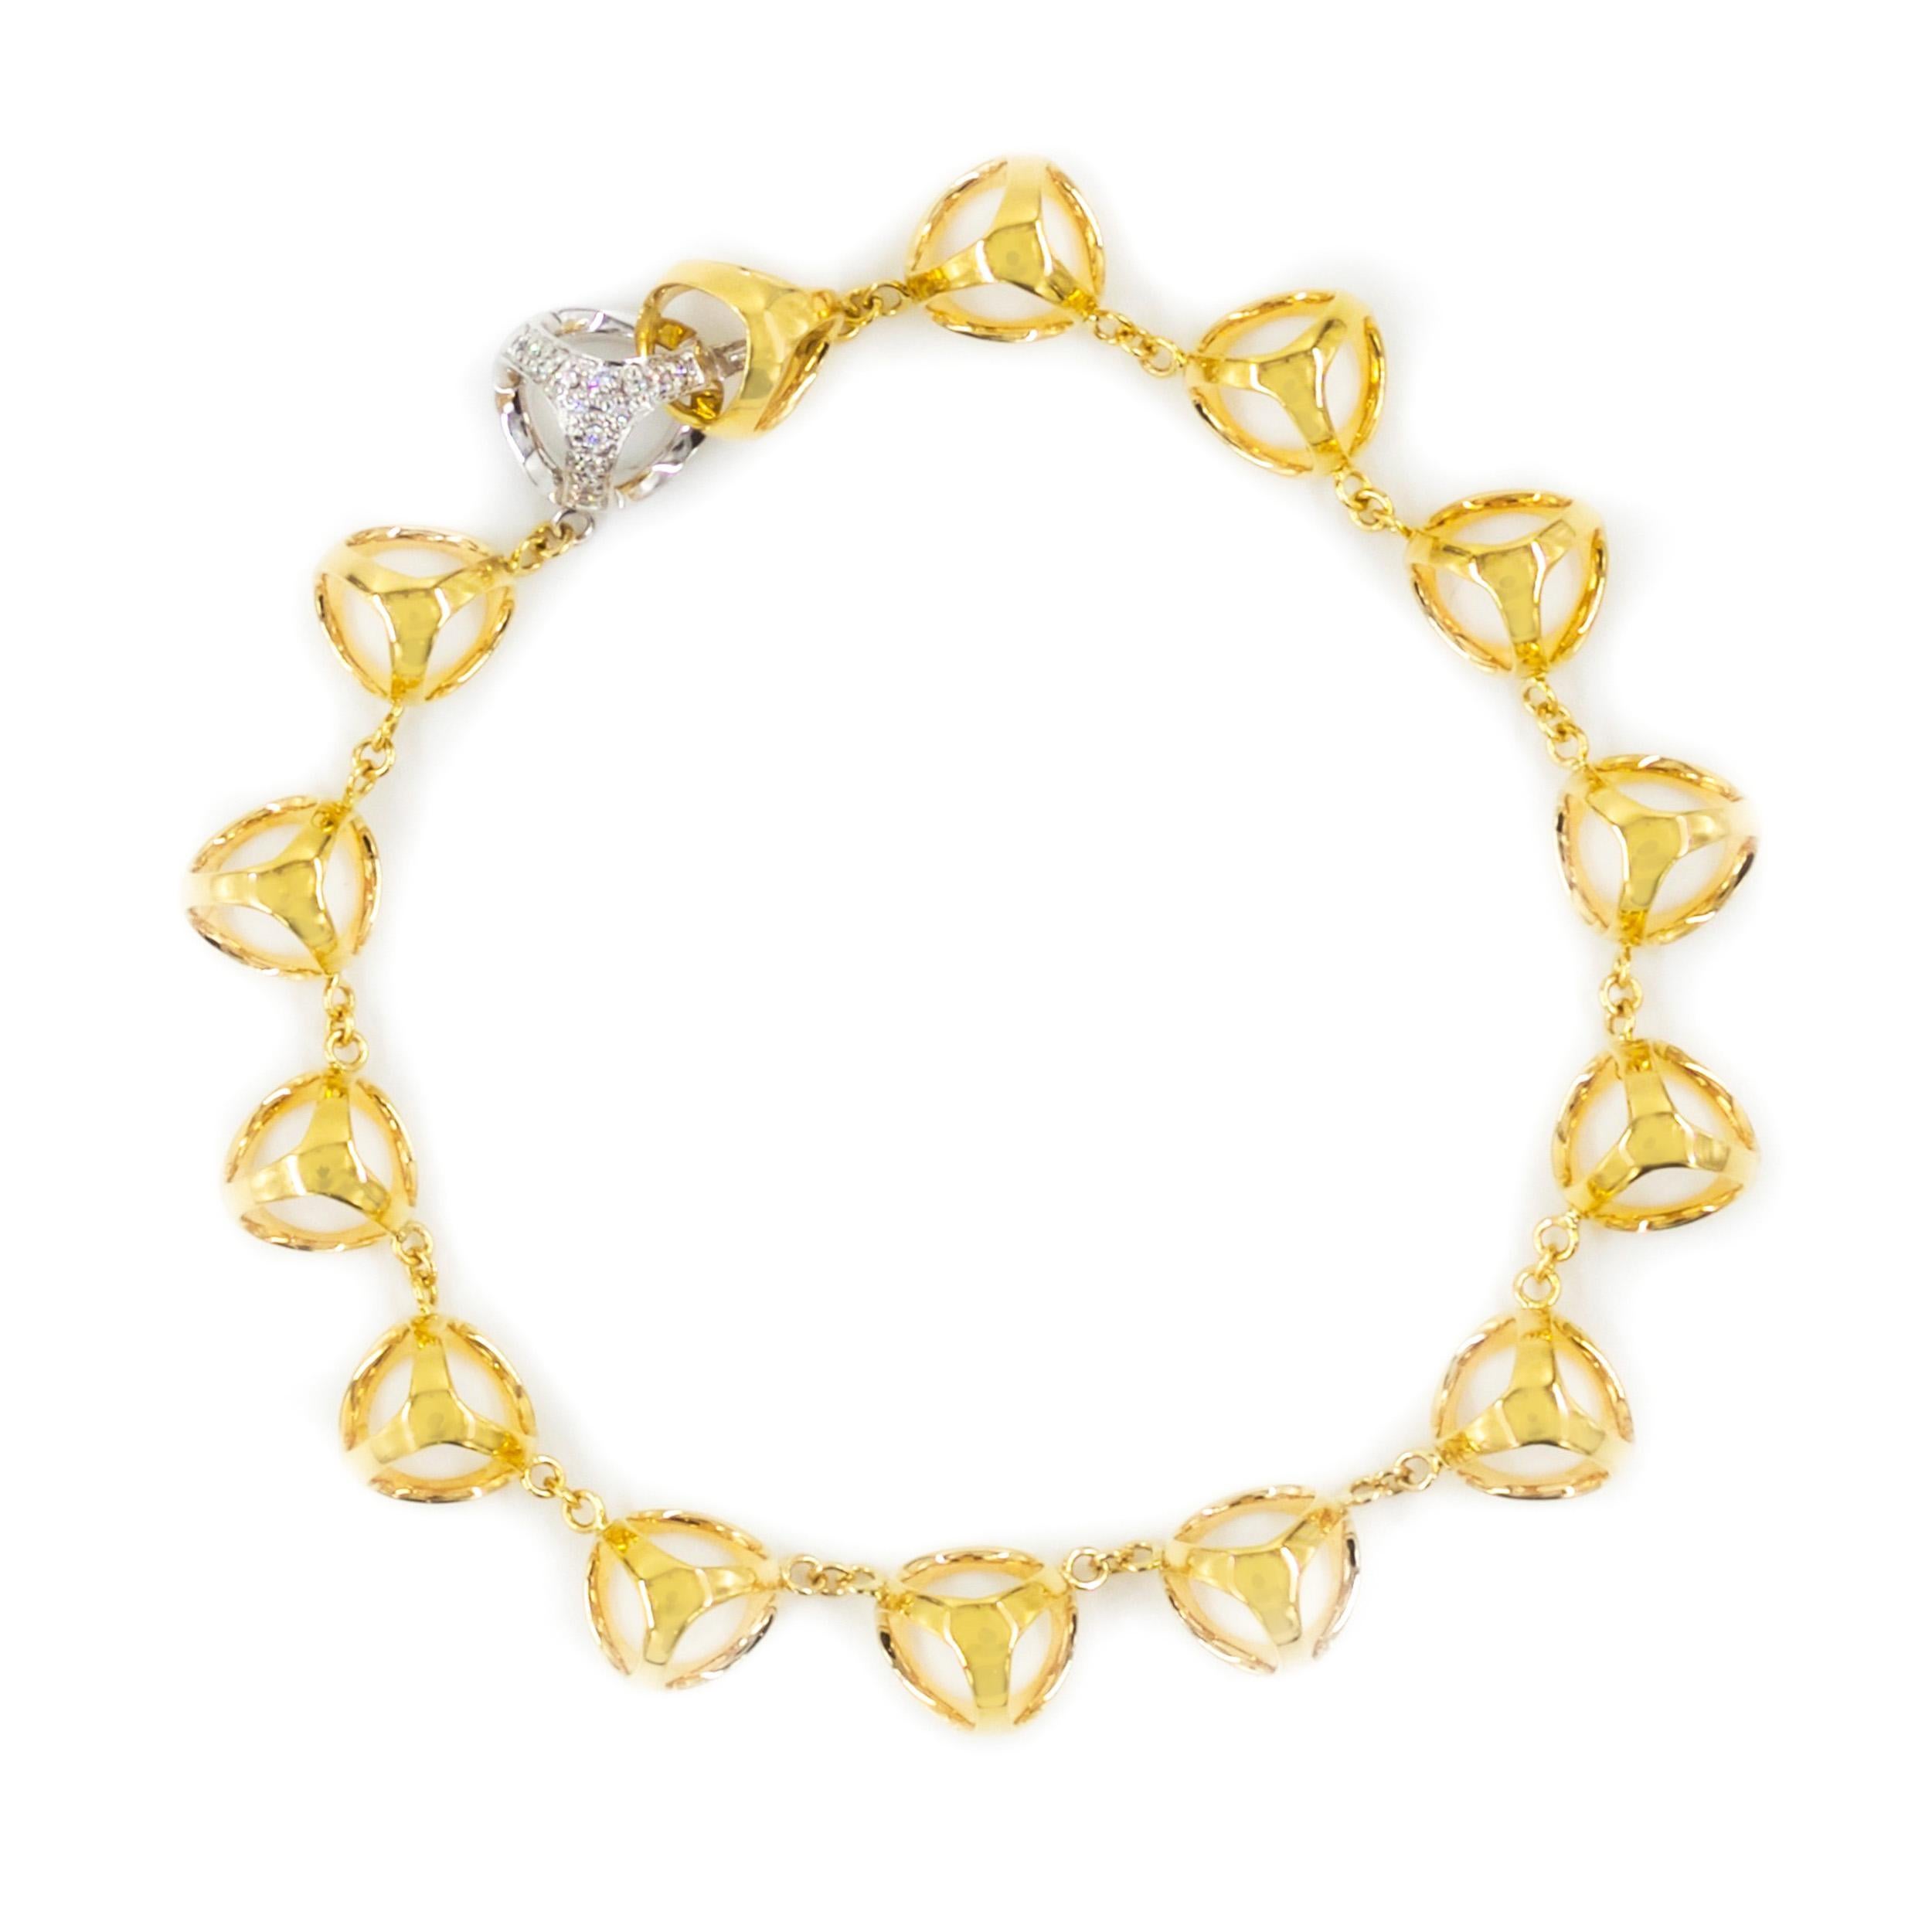 Contemporary DiModolo Italian 18k Gold and Diamond Necklace and Bracelet